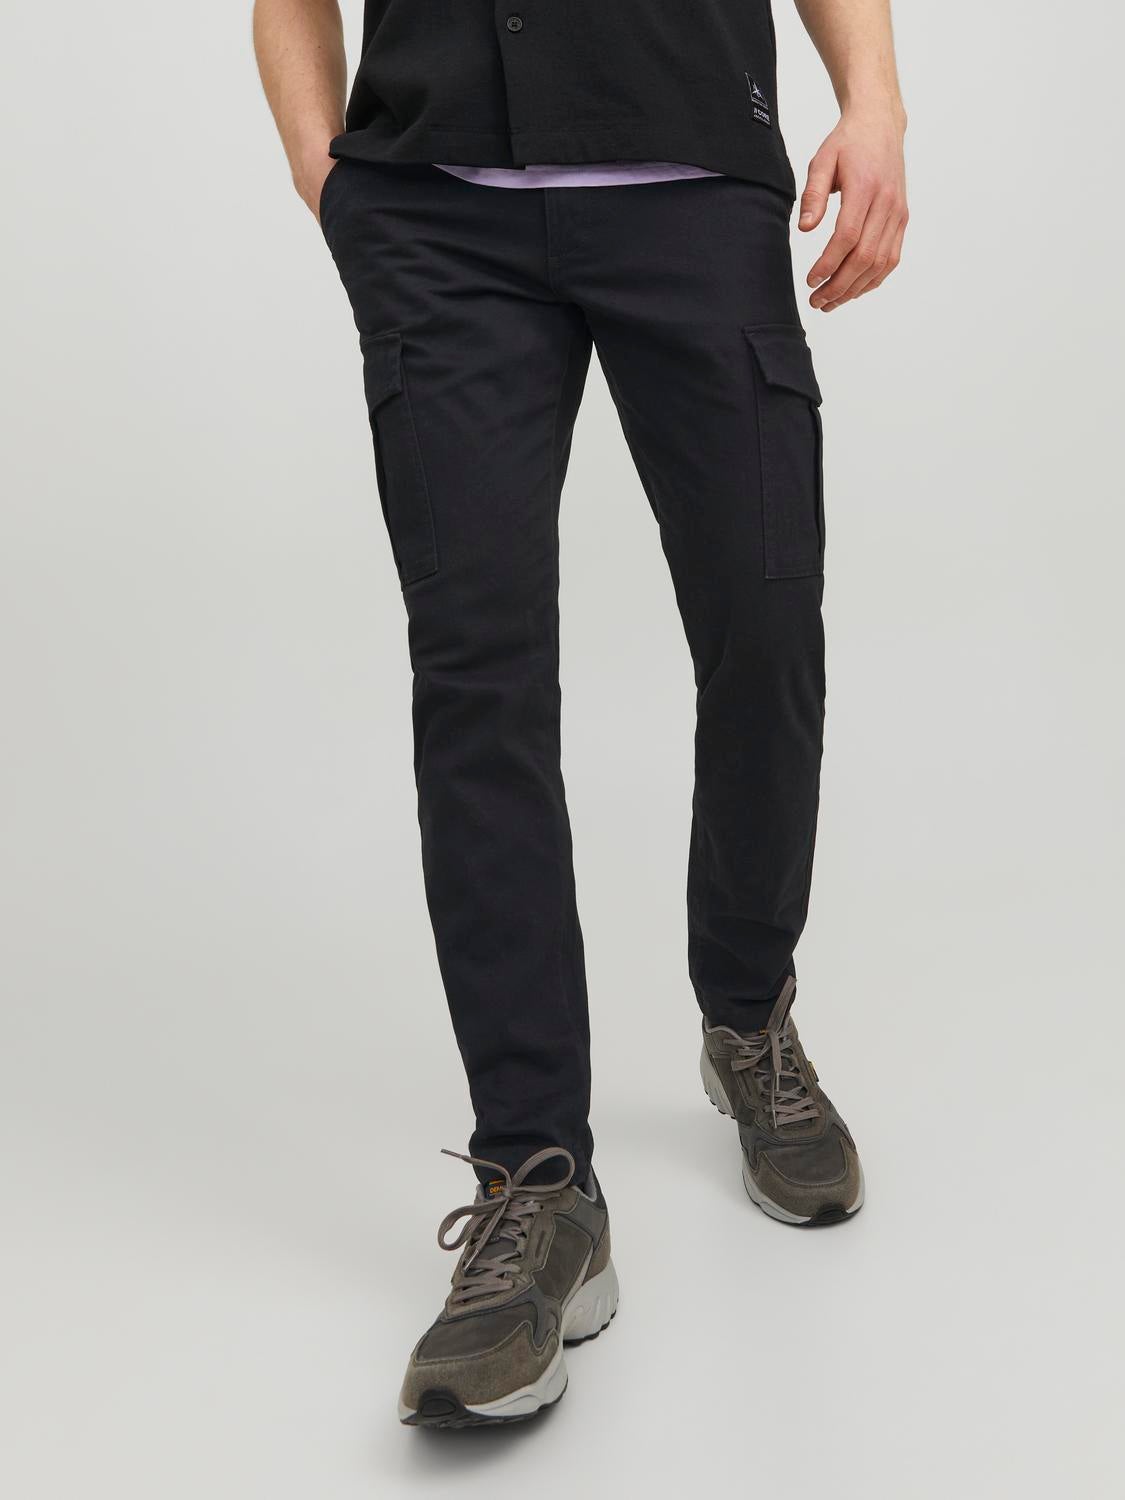 Buy Khaki Trousers & Pants for Men by ALTHEORY Online | Ajio.com